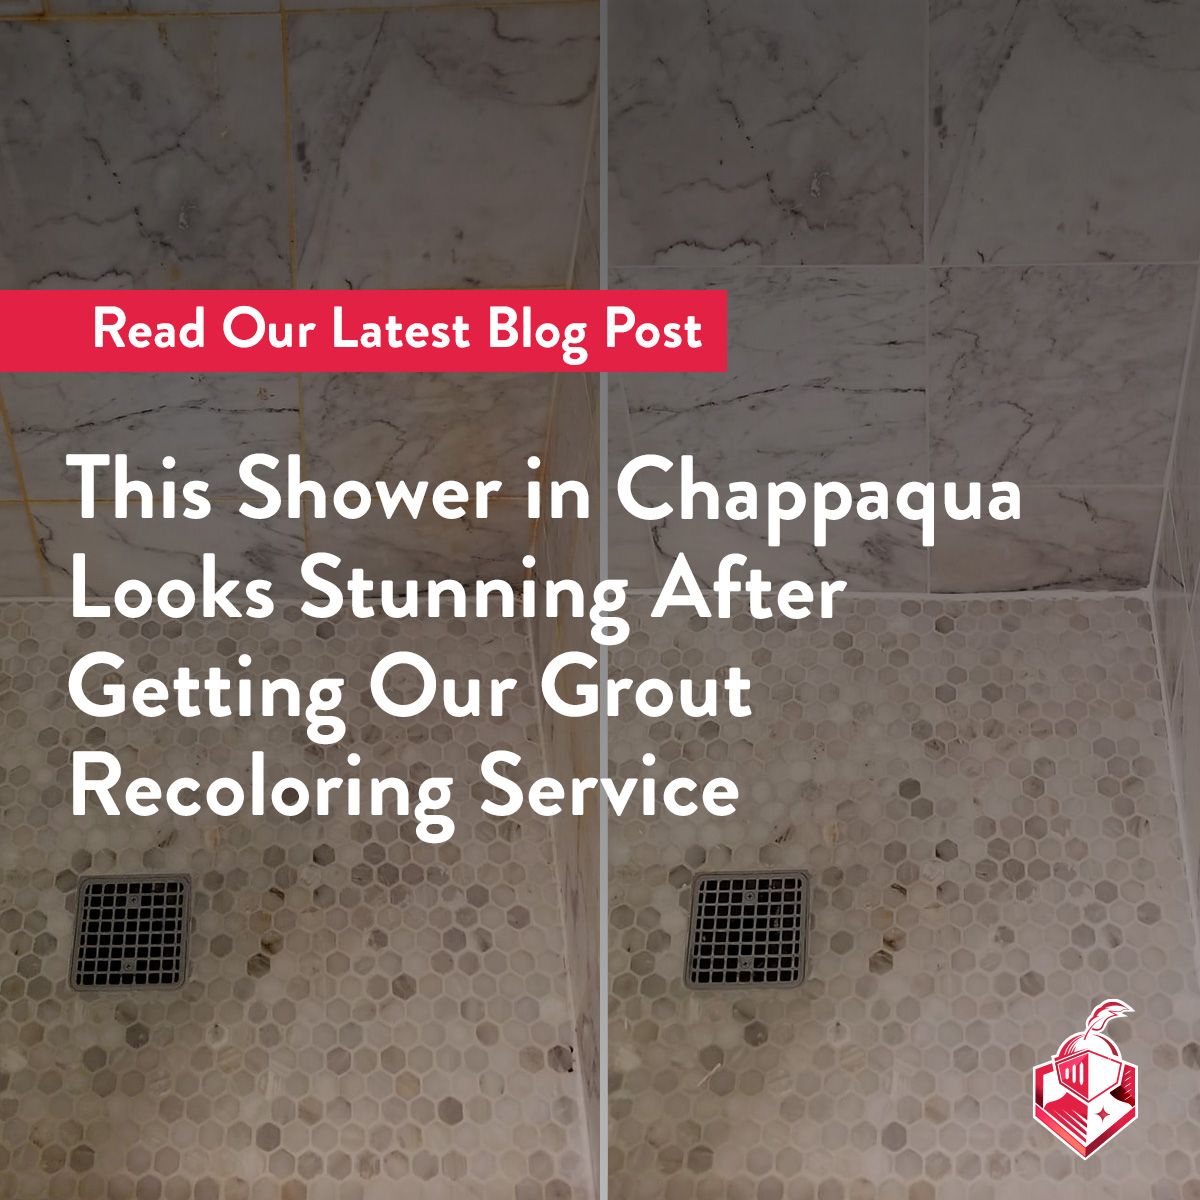 This Shower in Chappaqua Looks Stunning After Getting Our Grout Recoloring Service